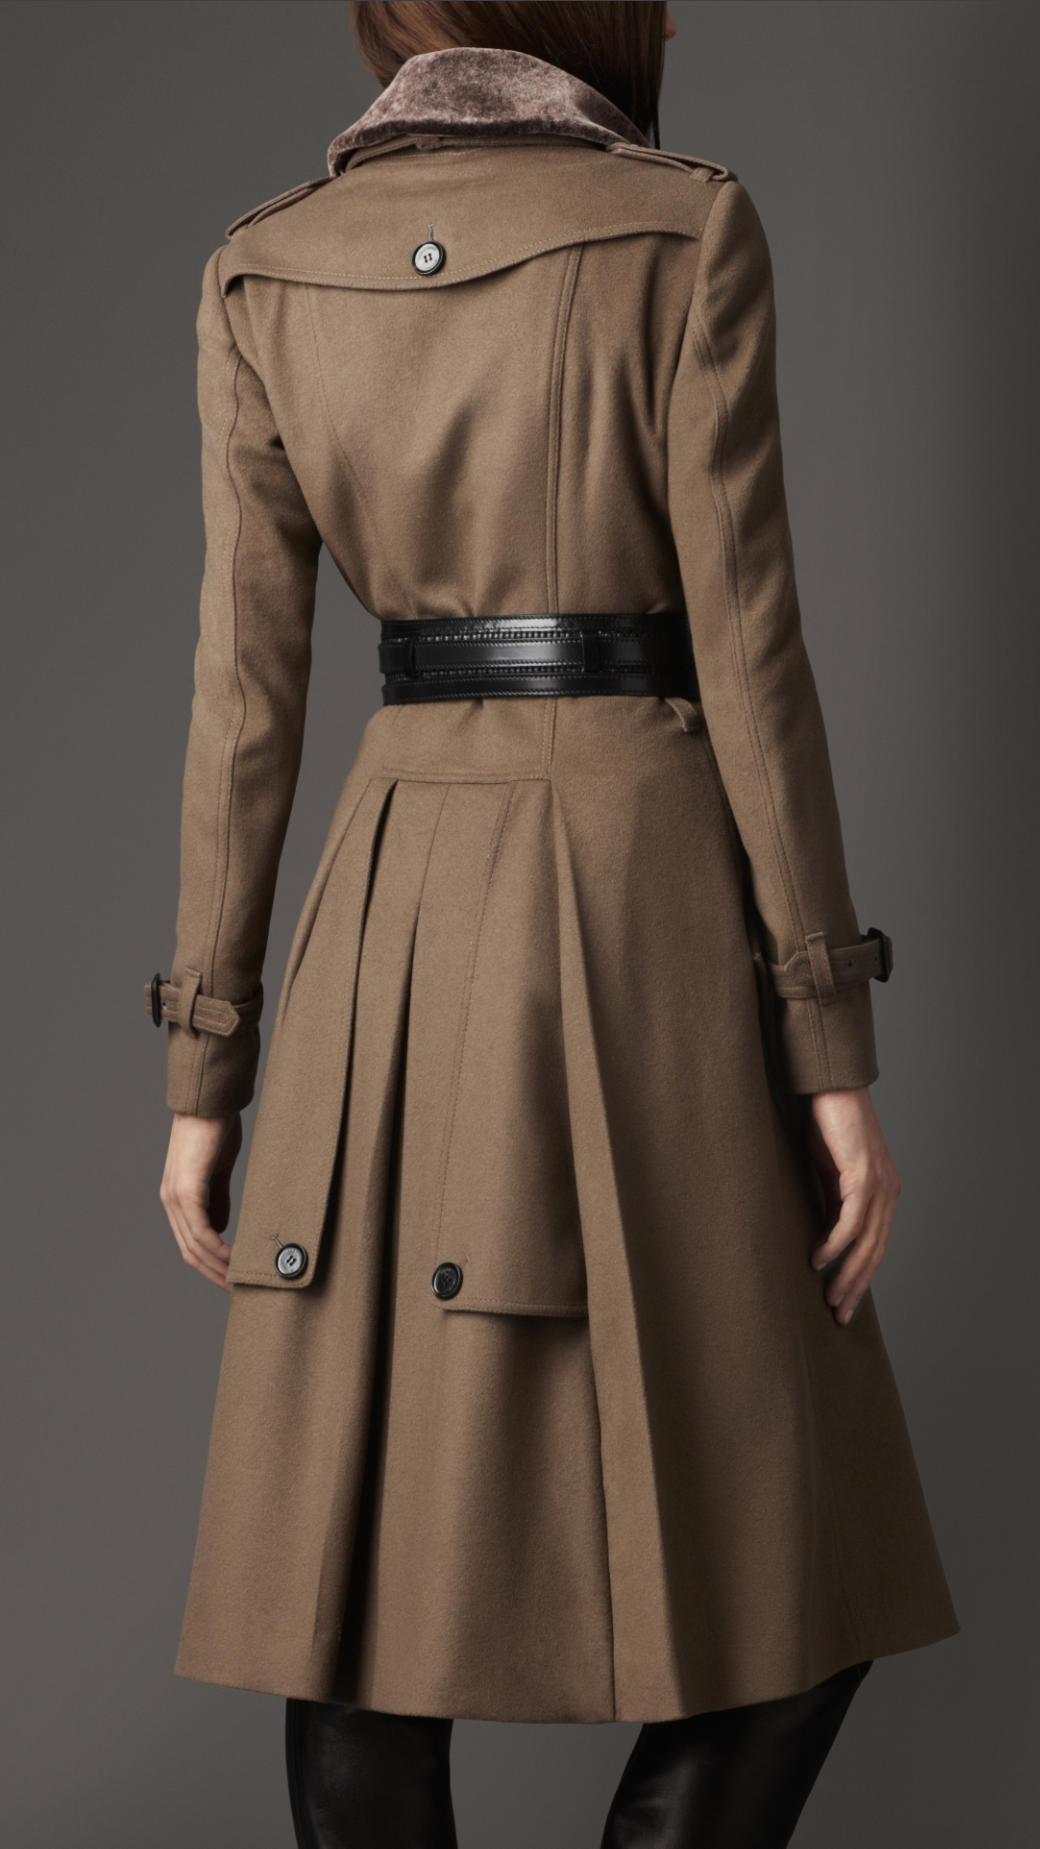 Lyst - Burberry Shearling Collar Wool Cashmere Coat in Brown